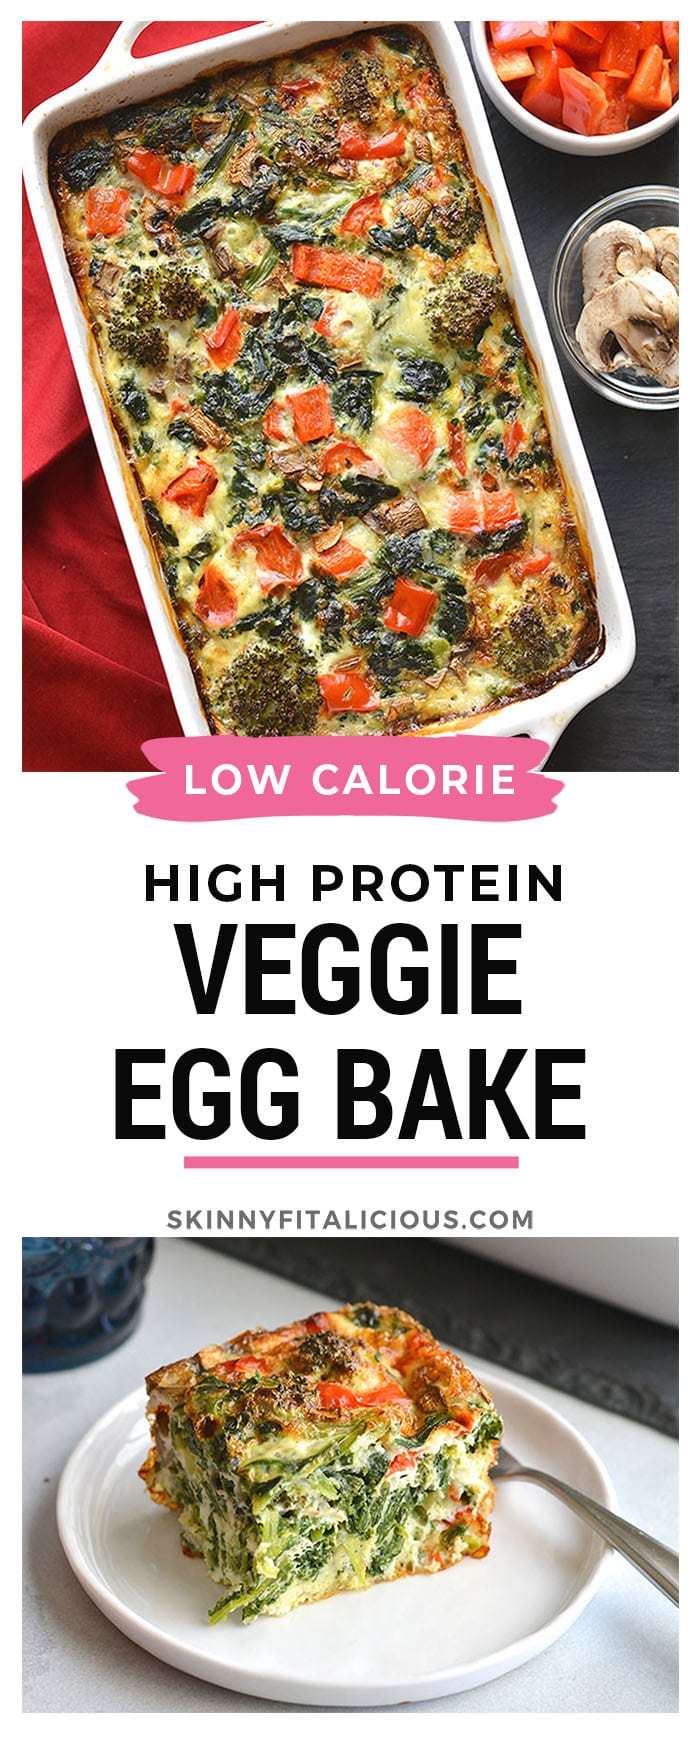 This High Protein Veggie Egg Bake is loaded with veggies and protein for a healthy breakfast. Great option for meal prepping or a weekend brunch! Low Calorie + Low Carb + Gluten Free